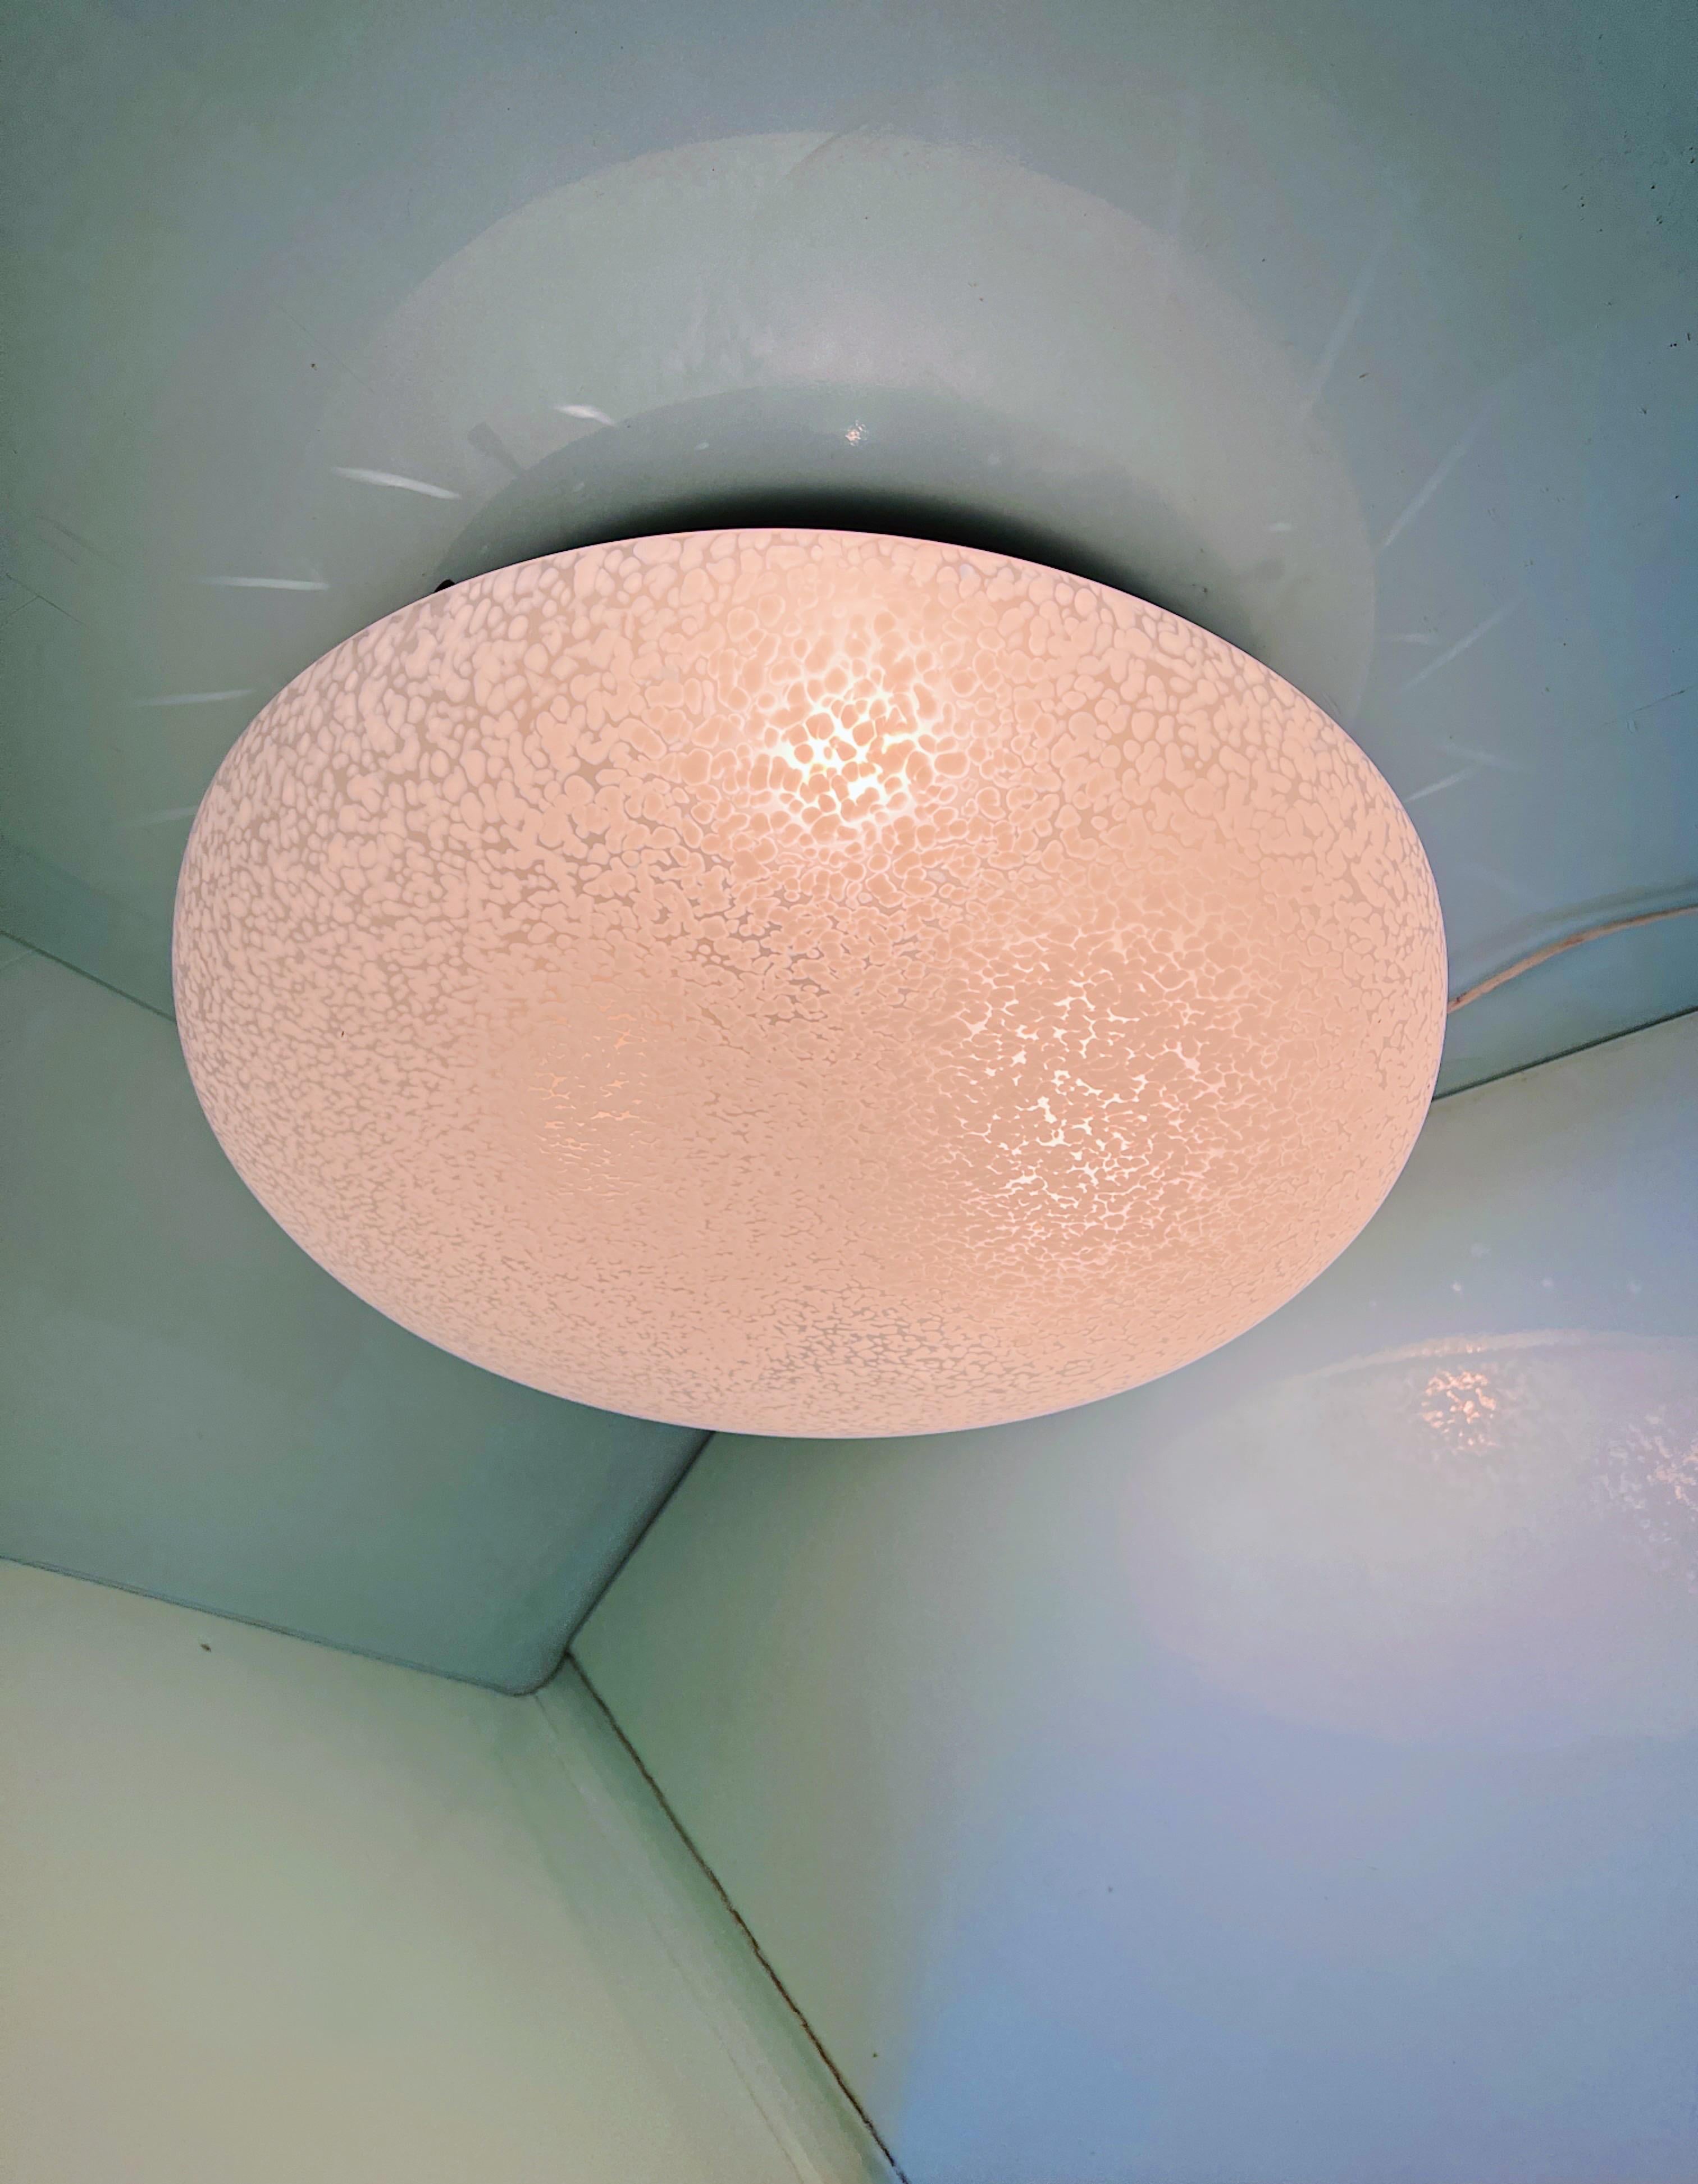 This large vintage Murano glass ceiling or wall light was designed by Carlo Nason in 1960s. The glass is adorned with dots that create a amazing interplay of light when lit. What's even more versatile is that you can mount it on both the ceiling and